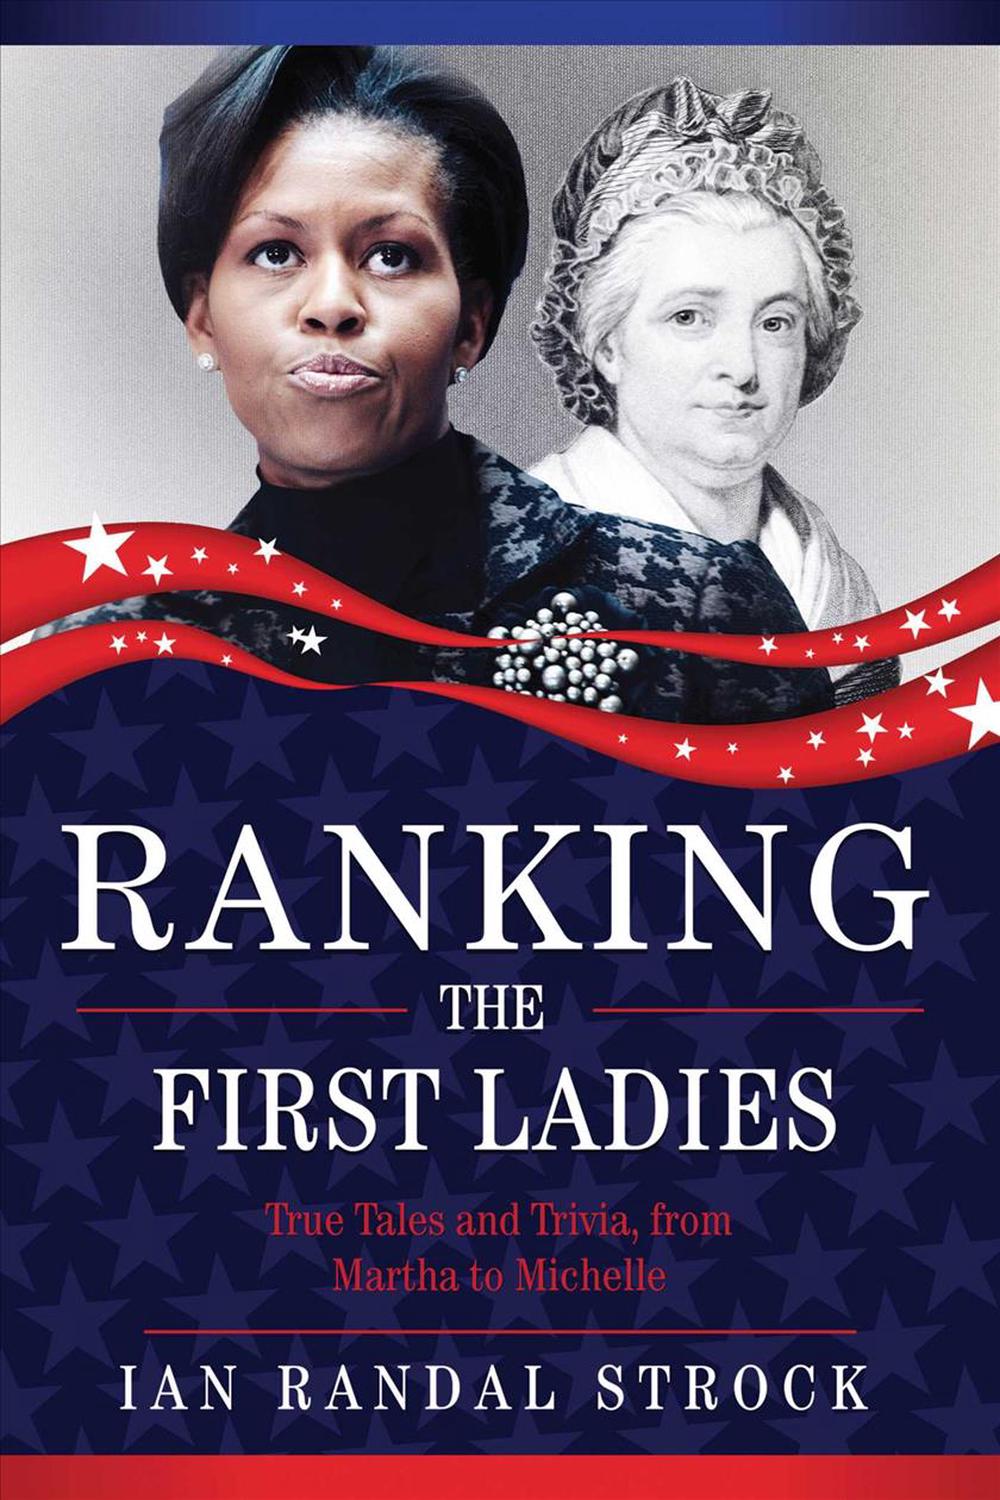 Ranking the First Ladies True Tales and Trivia, from Martha Washington